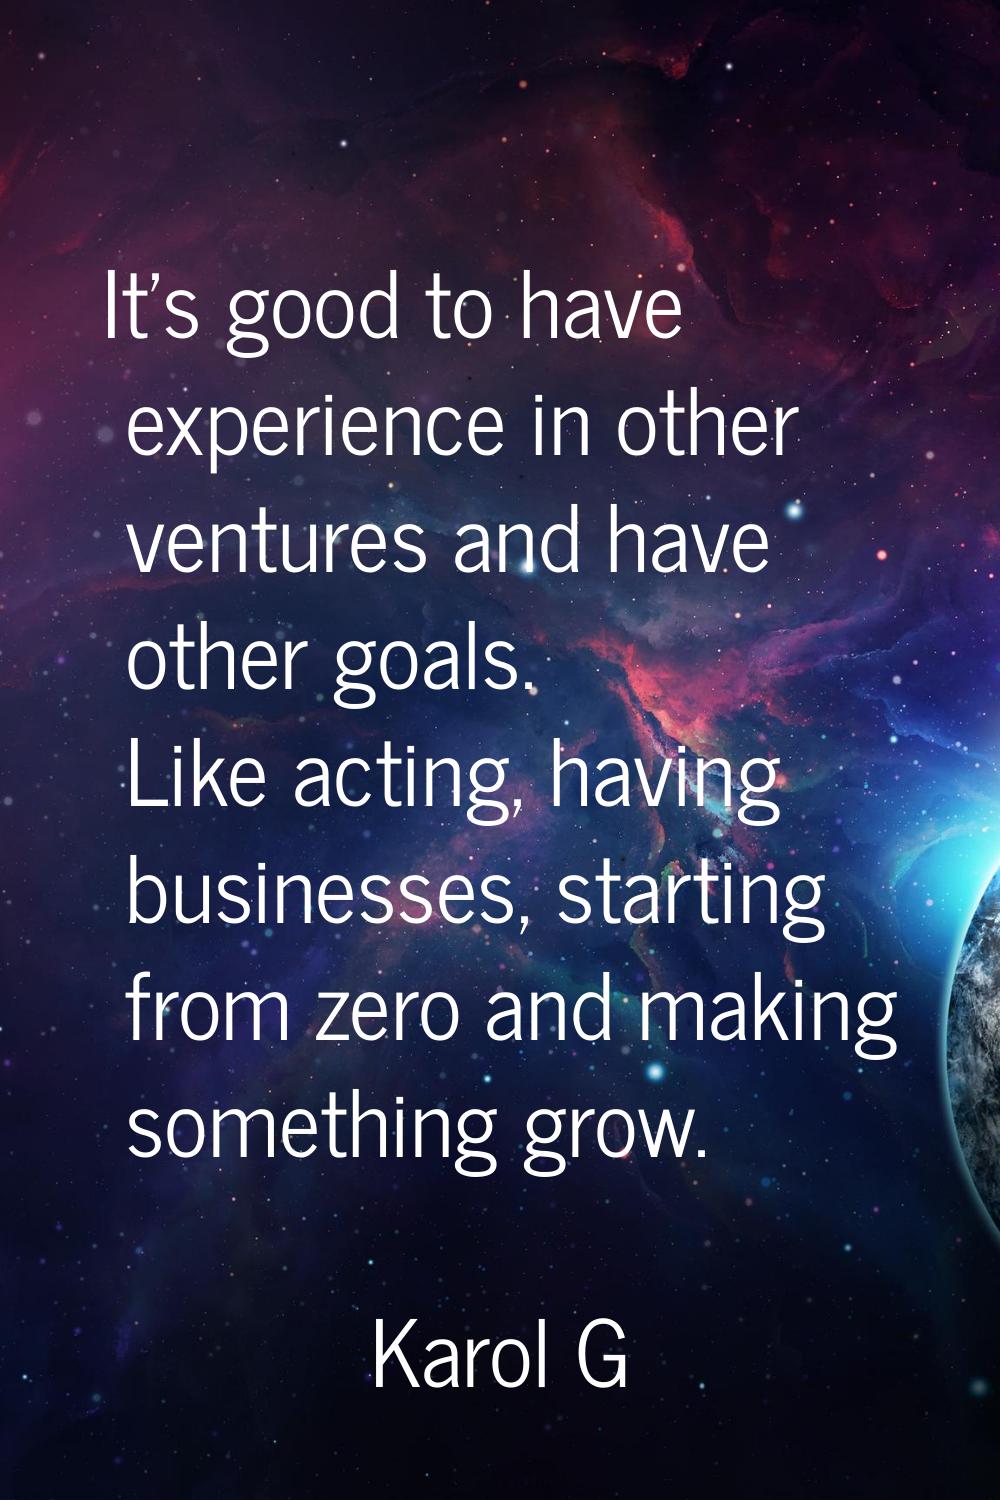 It's good to have experience in other ventures and have other goals. Like acting, having businesses